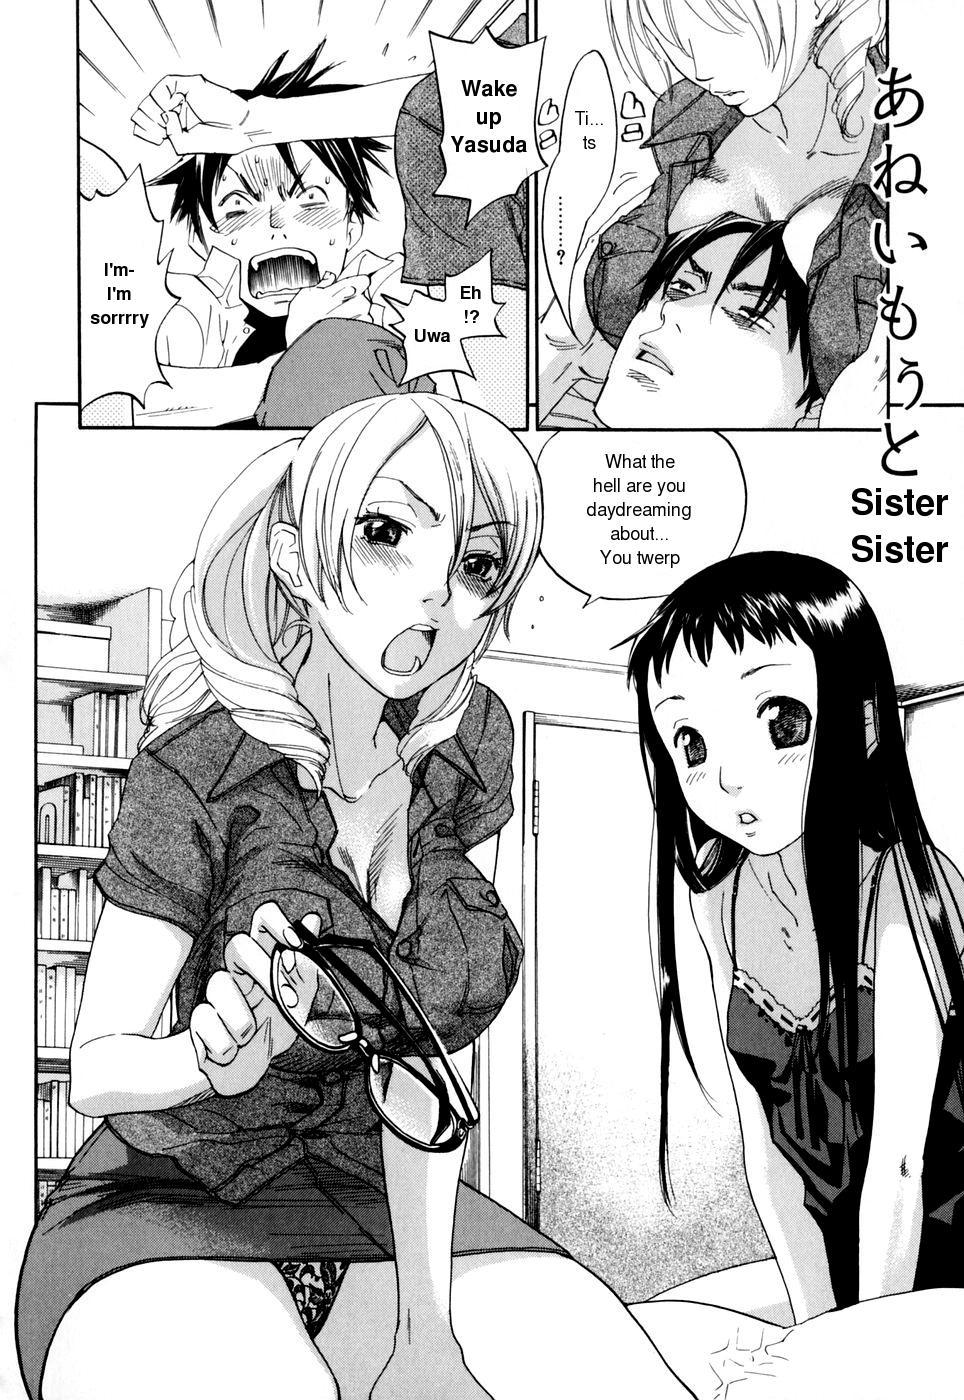 Babysitter Sister Sister Mum - Page 2